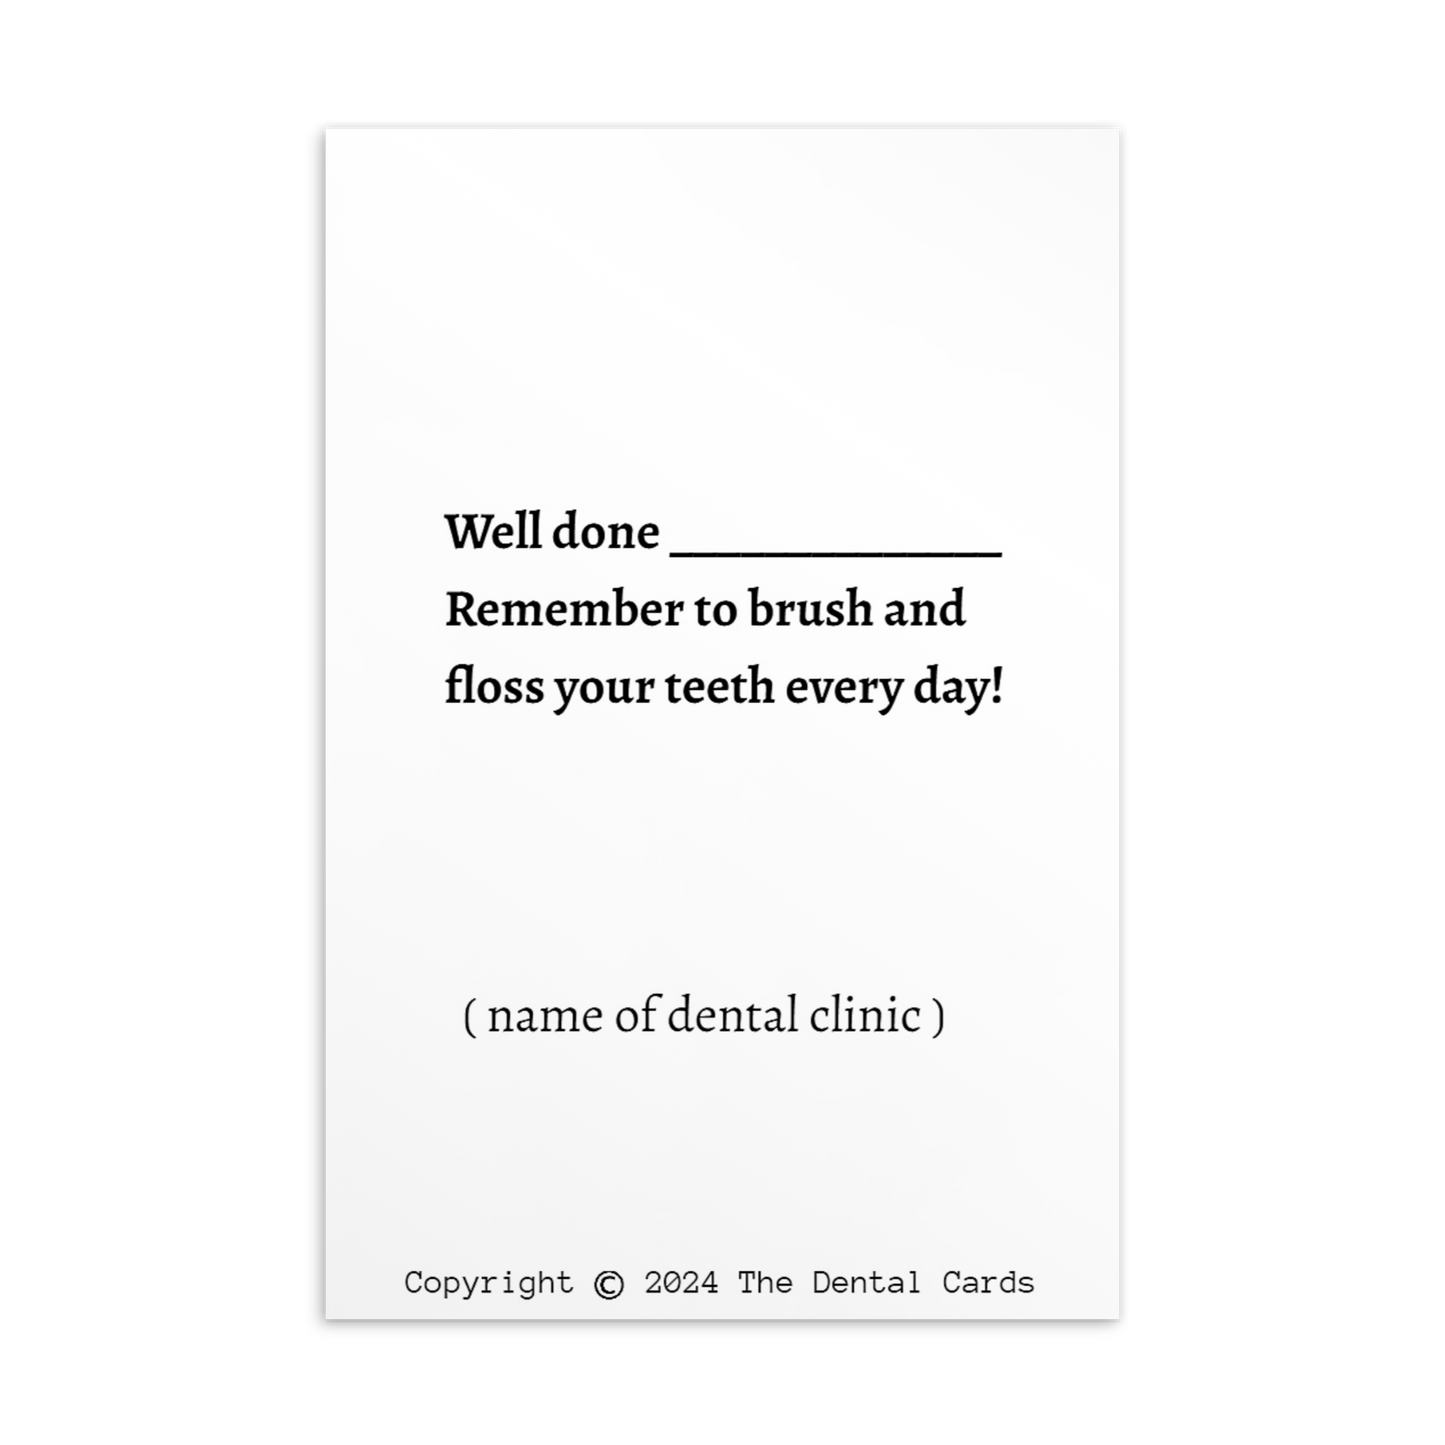 Winnie The Pooh | Dental Motivational & Reward Cards- Keep Up The Awesome Work Looking After Your Smile!